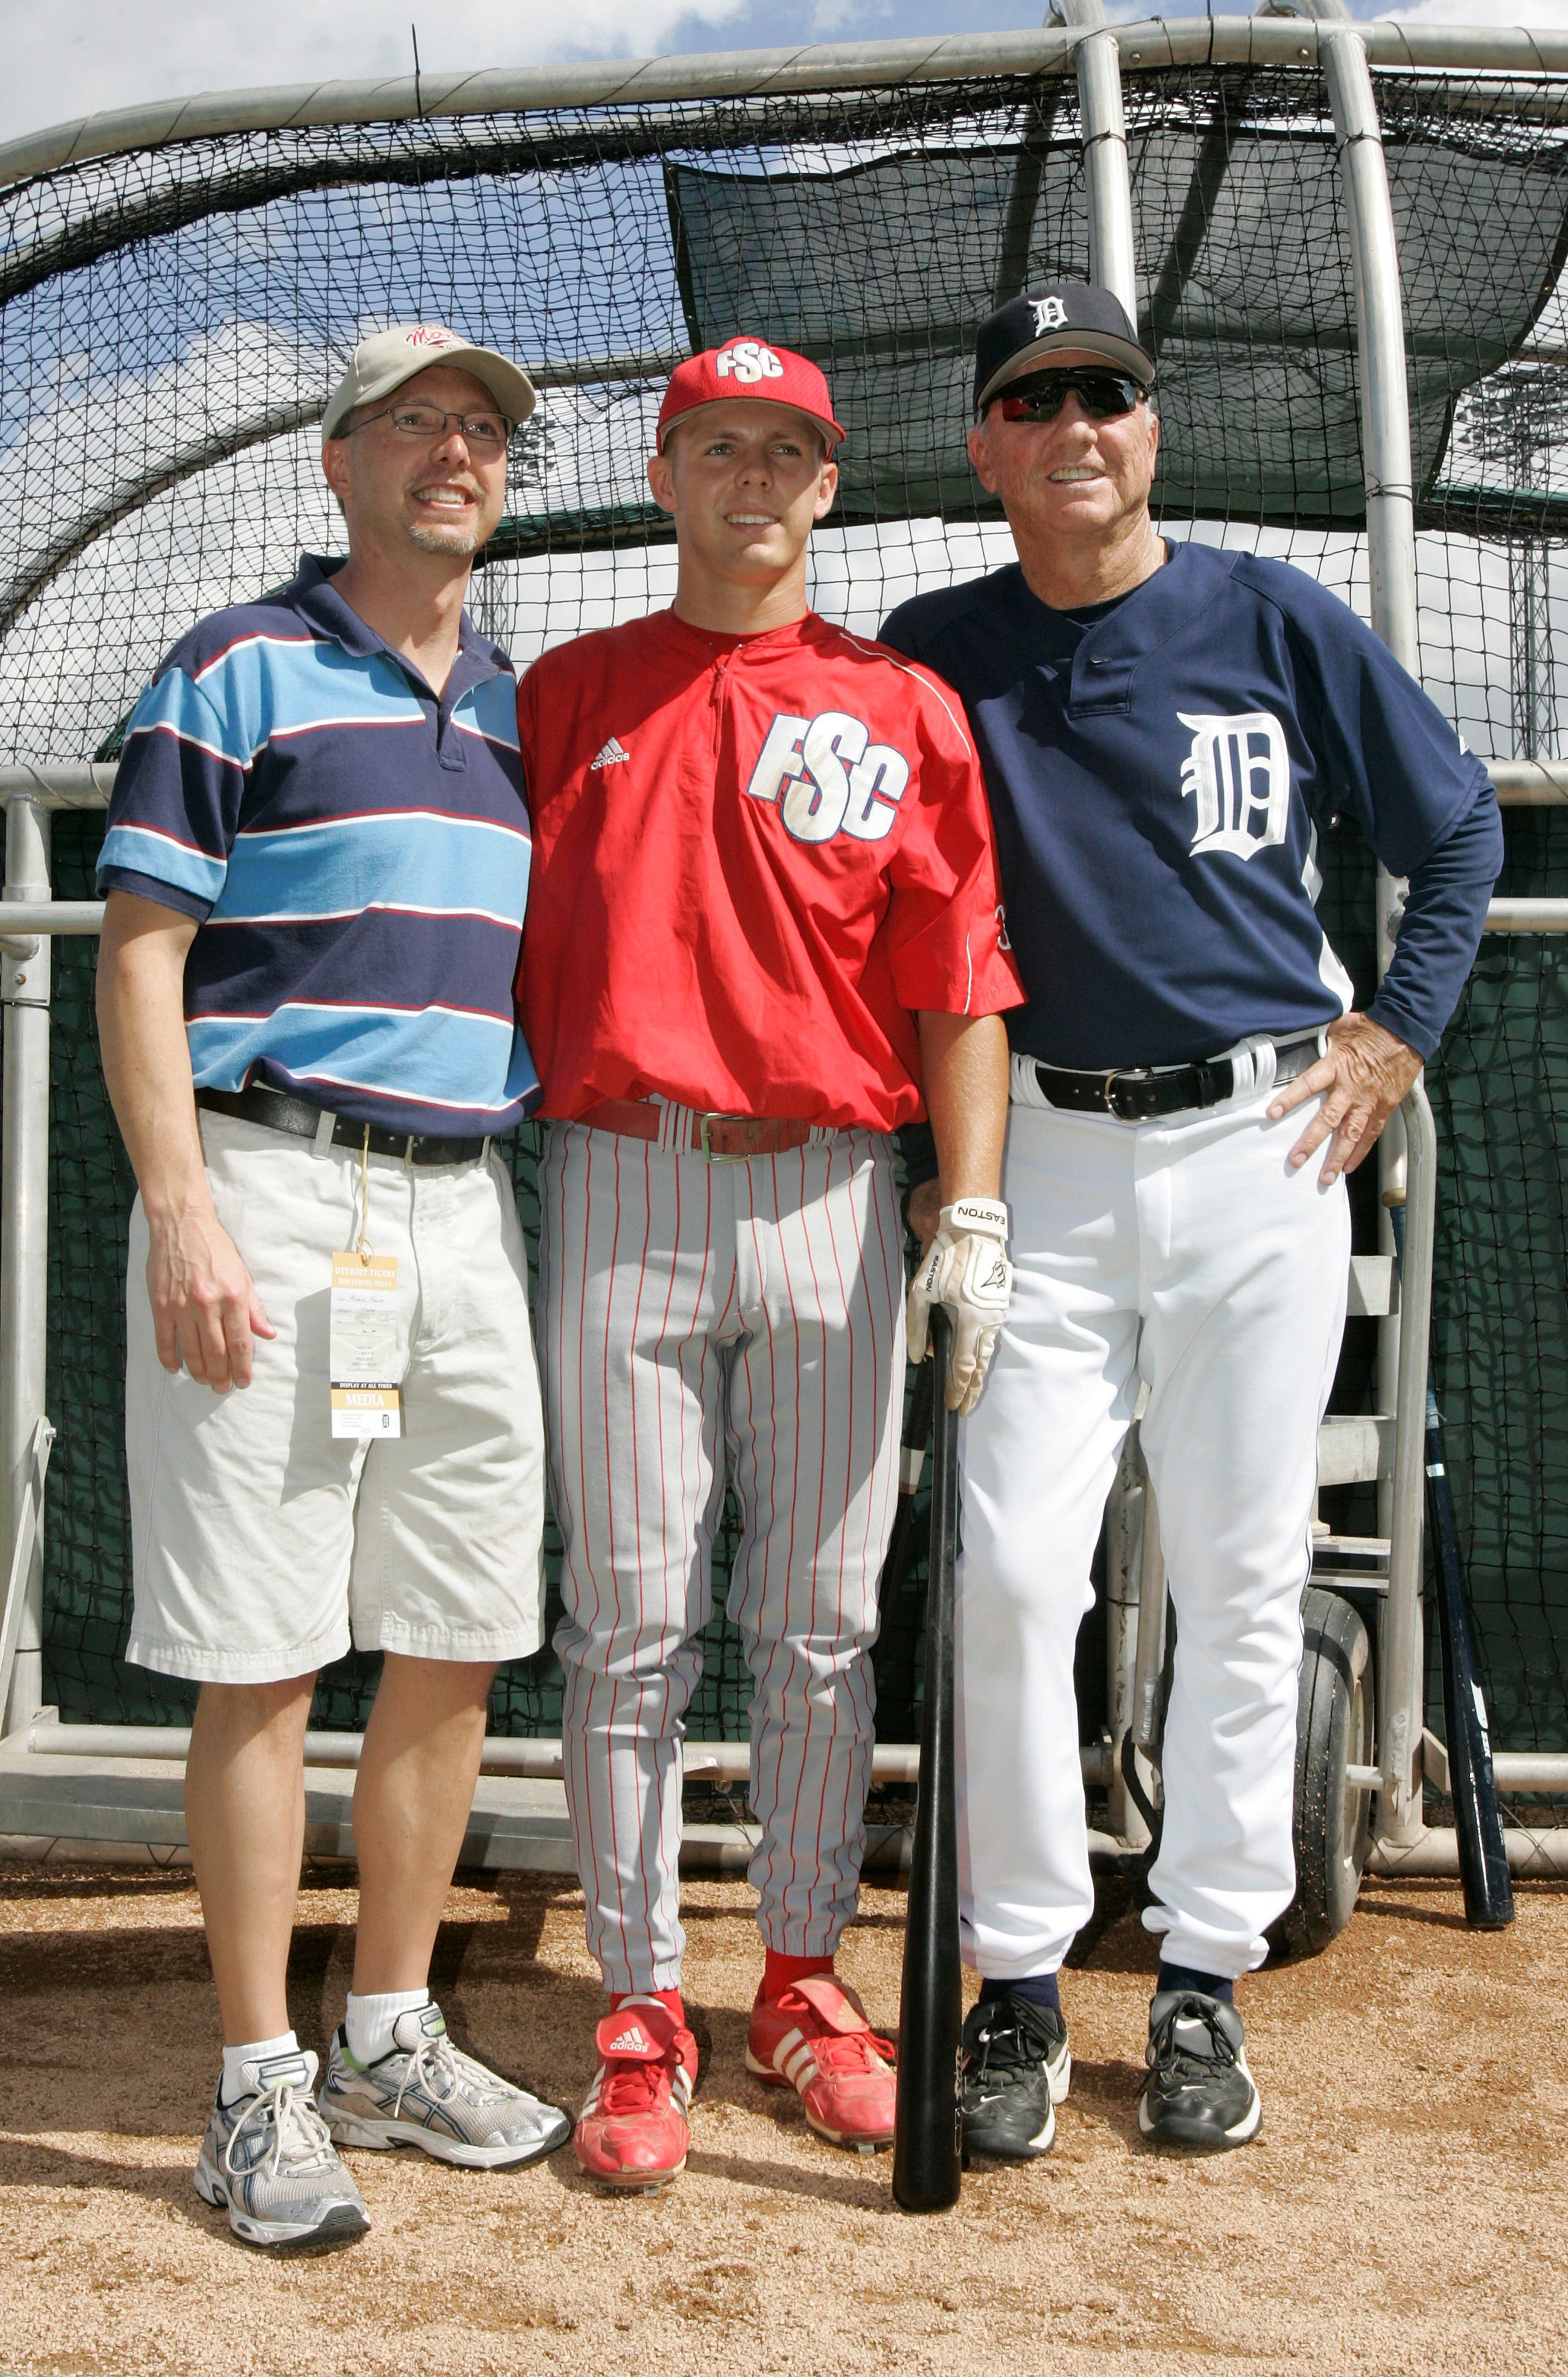 Three generations of the Kaline family, from left, Al Kaline's son Michael Kaline, Florida Southern College infielder Colin Kaline and his grandfather, Detroit Tigers great Al Kaline, pose for a photo for the Detroit Tigers team photographer before a spring training game in 2008.